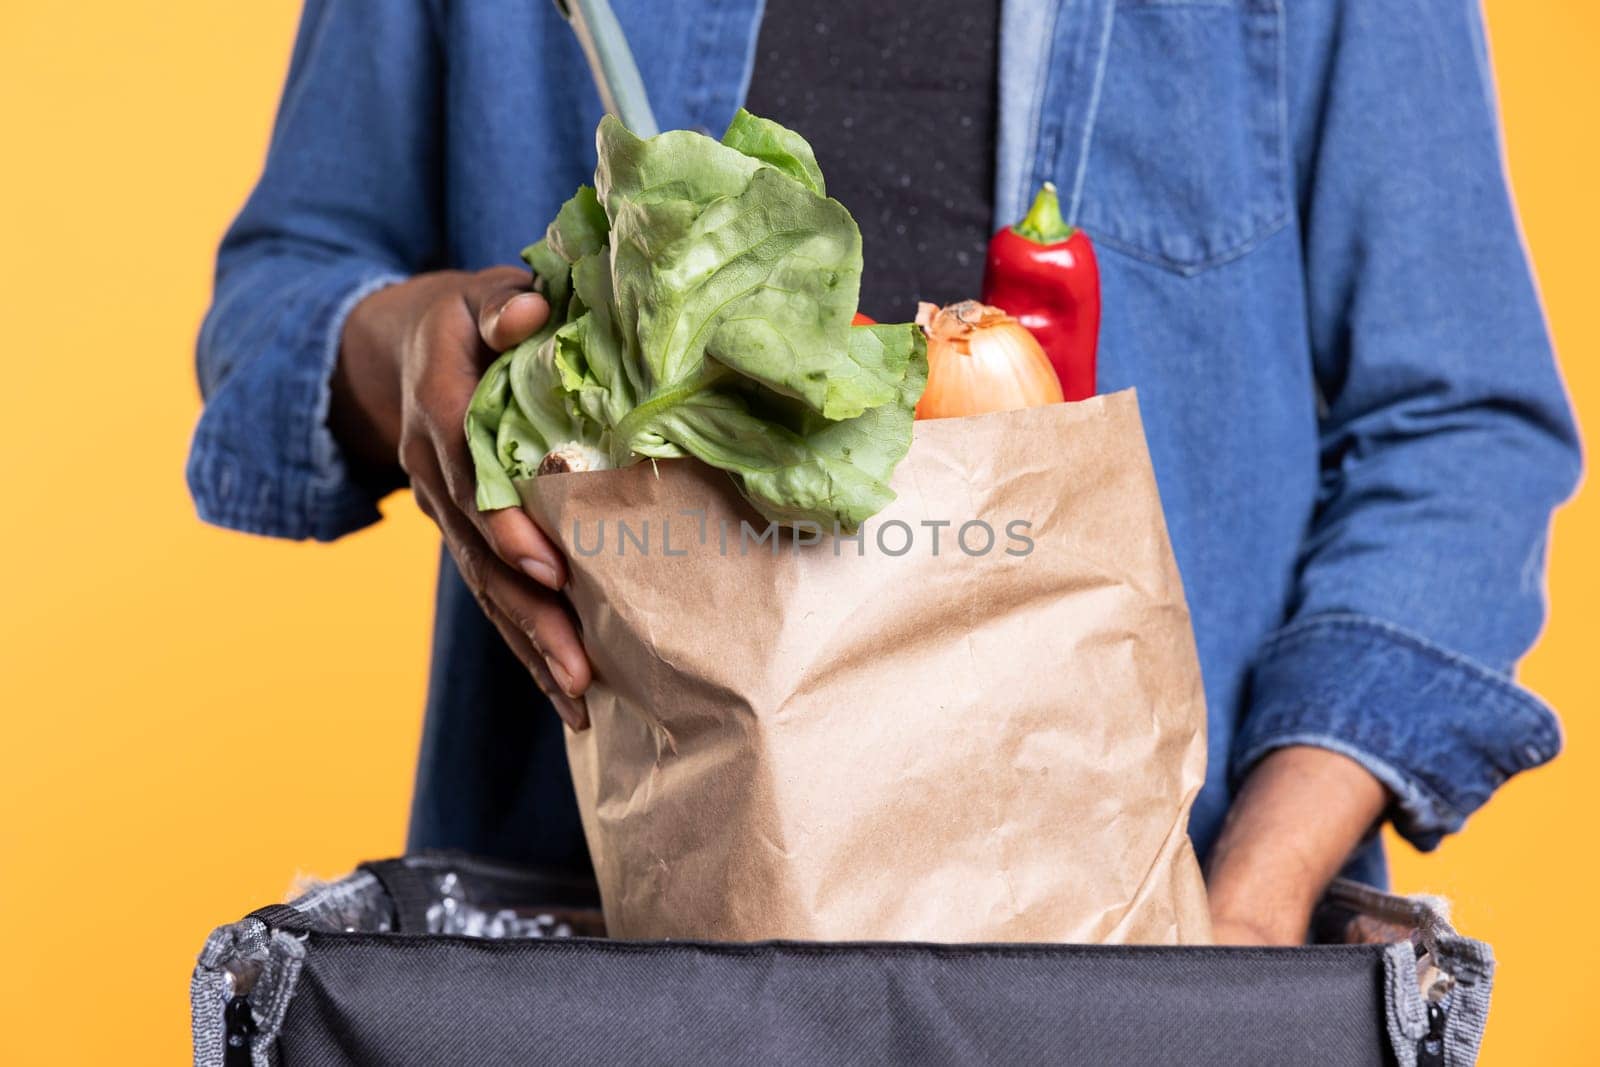 Male model courier emptying a paper bag full of fresh groceries by DCStudio